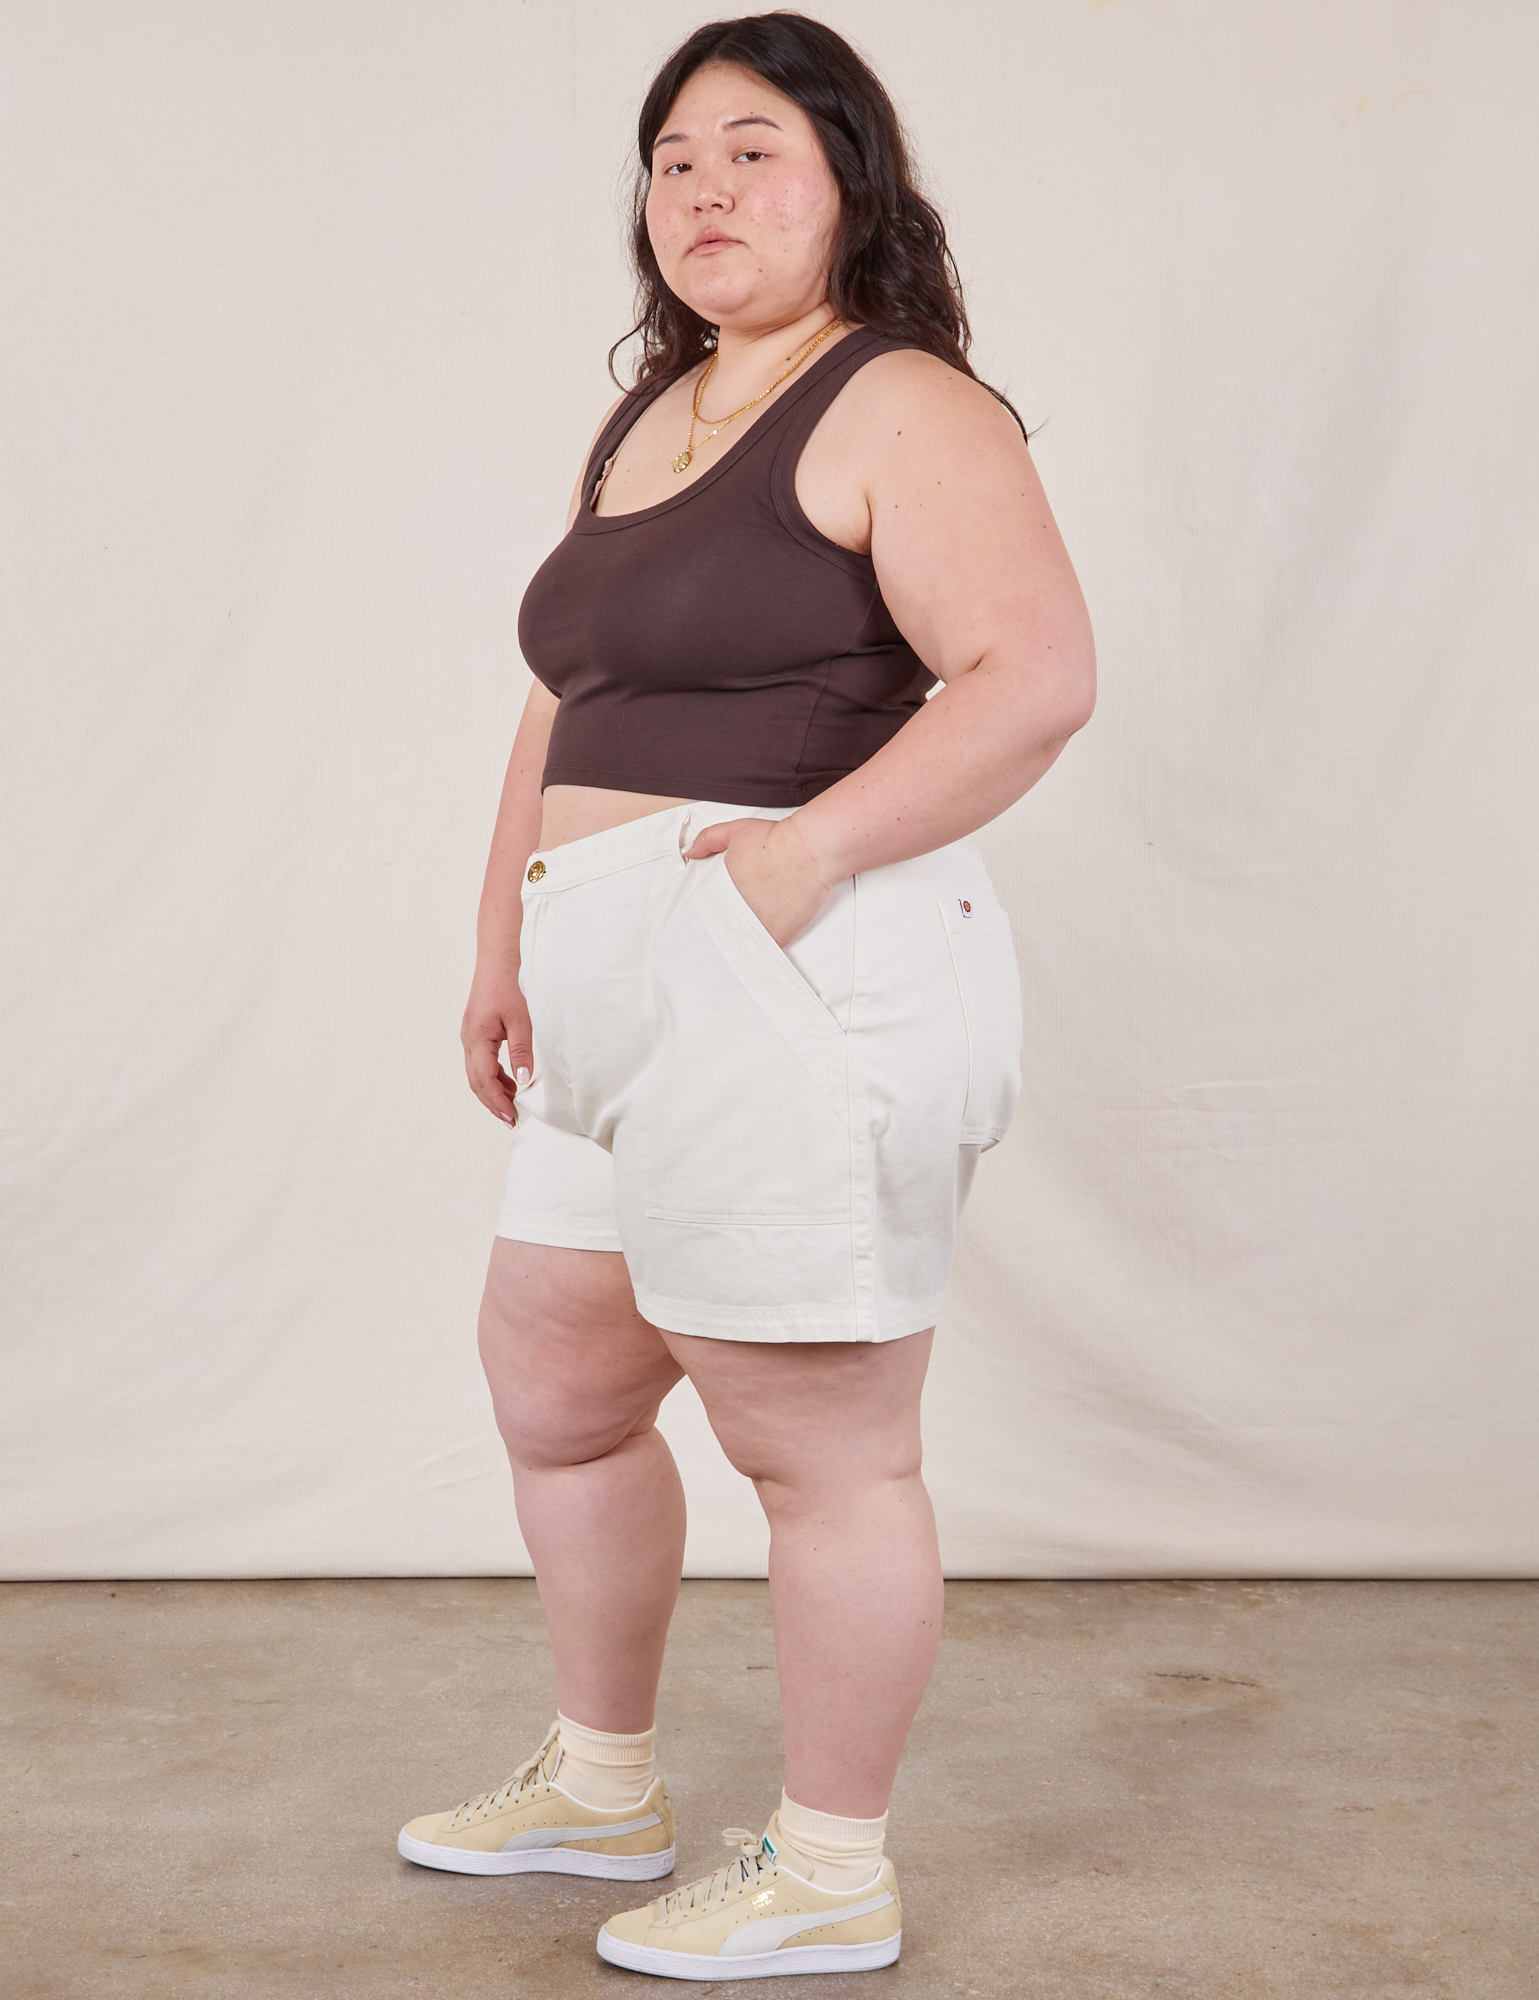 Side view of Classic Work Shorts in Vintage Tee Off-White and espresso brown Cropped Tank Top on Ashley